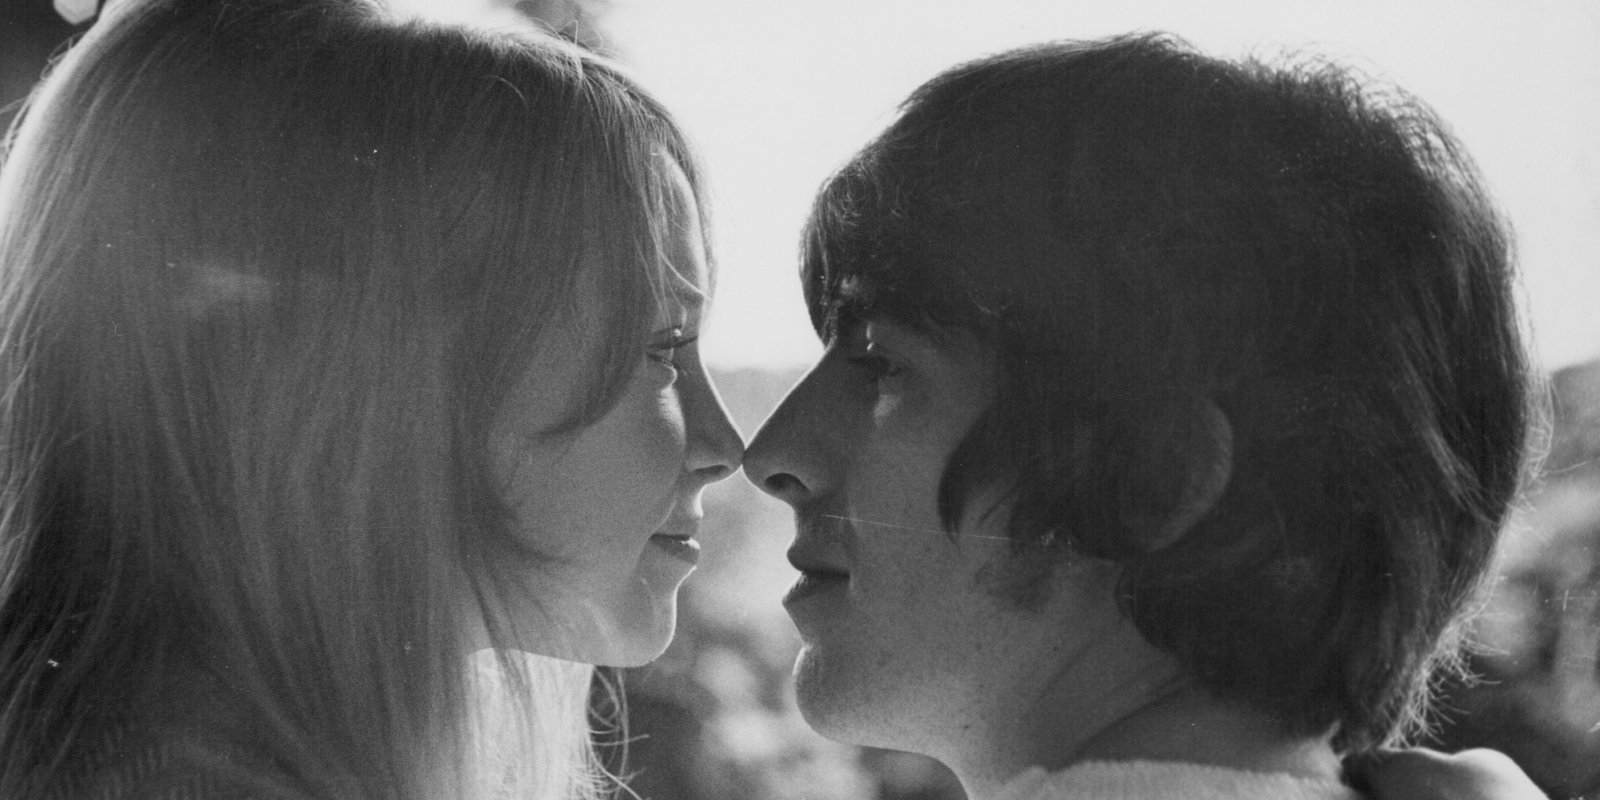 Pattie Boyd and George Harrison photographed in Barbados in 1966.